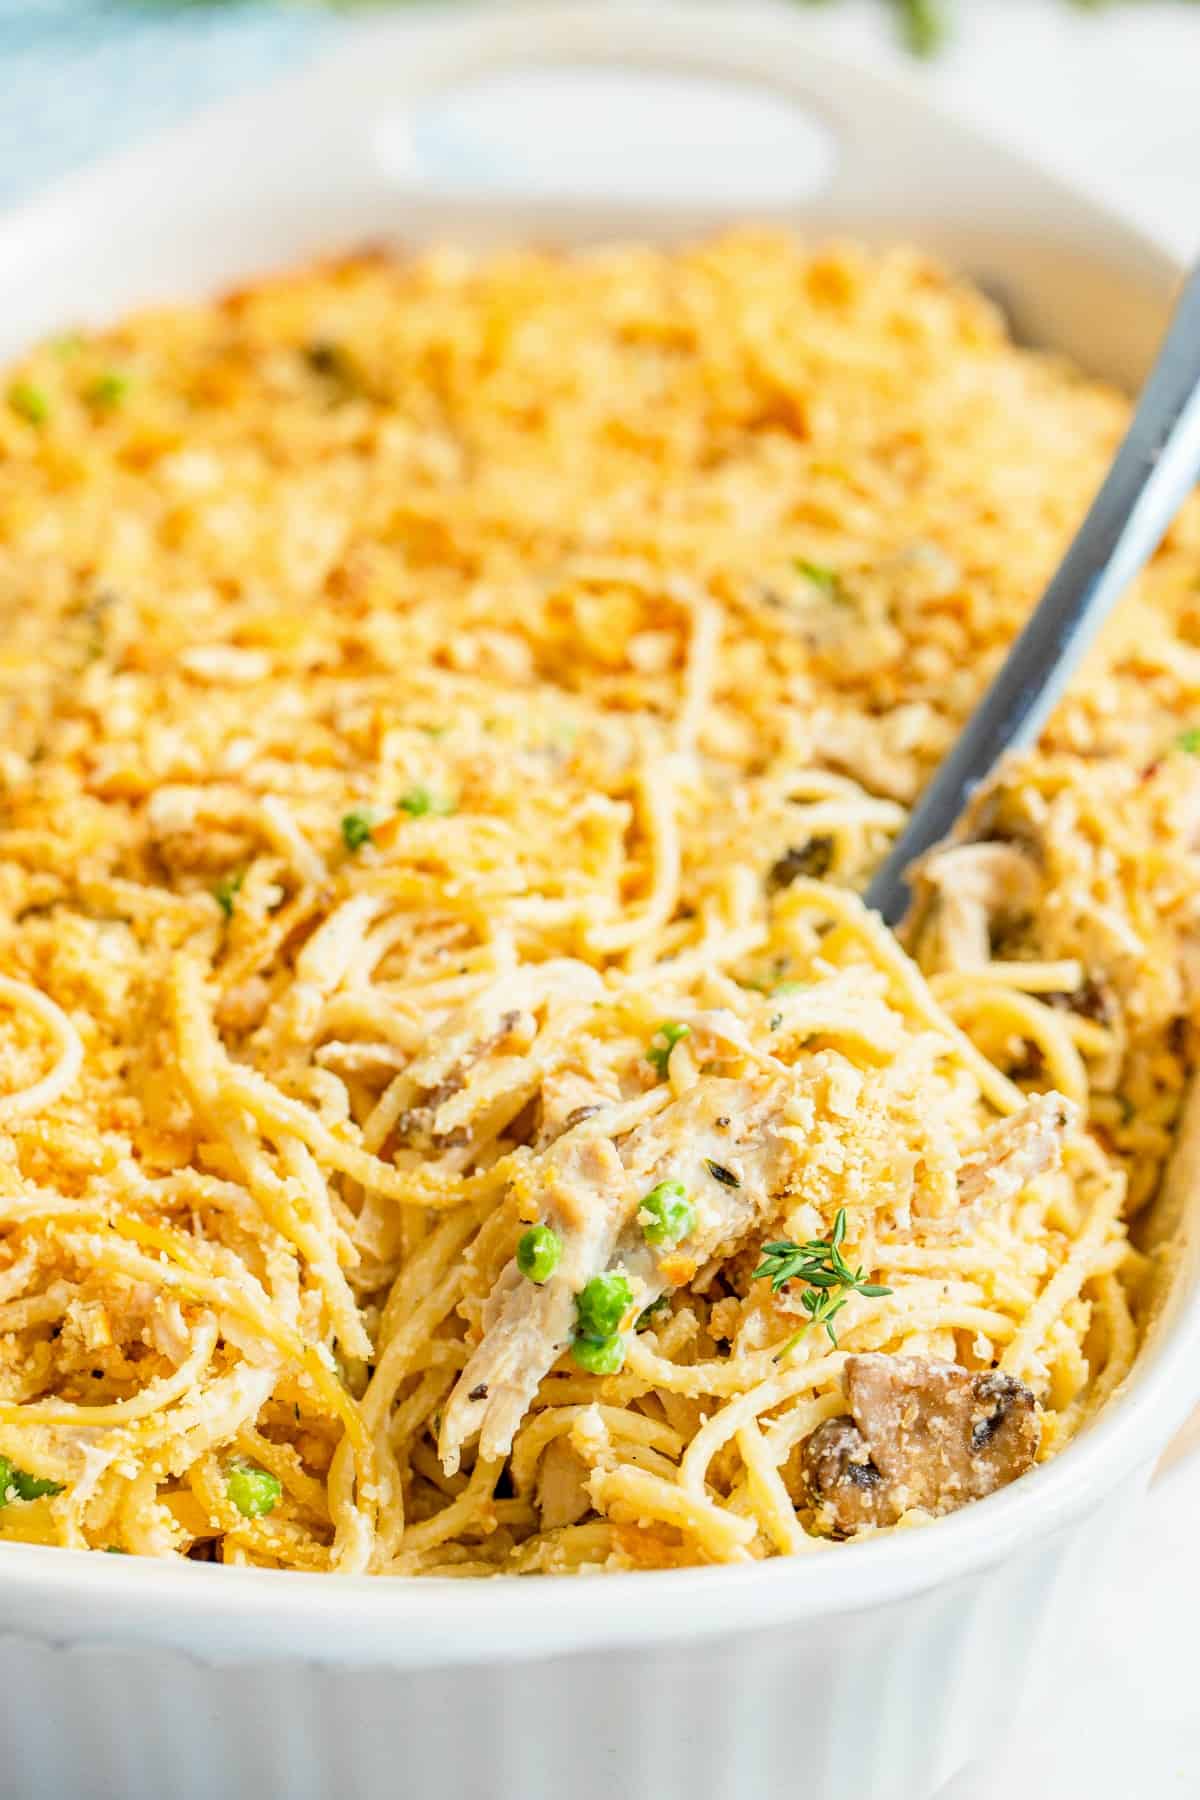 Turkey tetrazzini in a bagkin dish with spoon for serving.